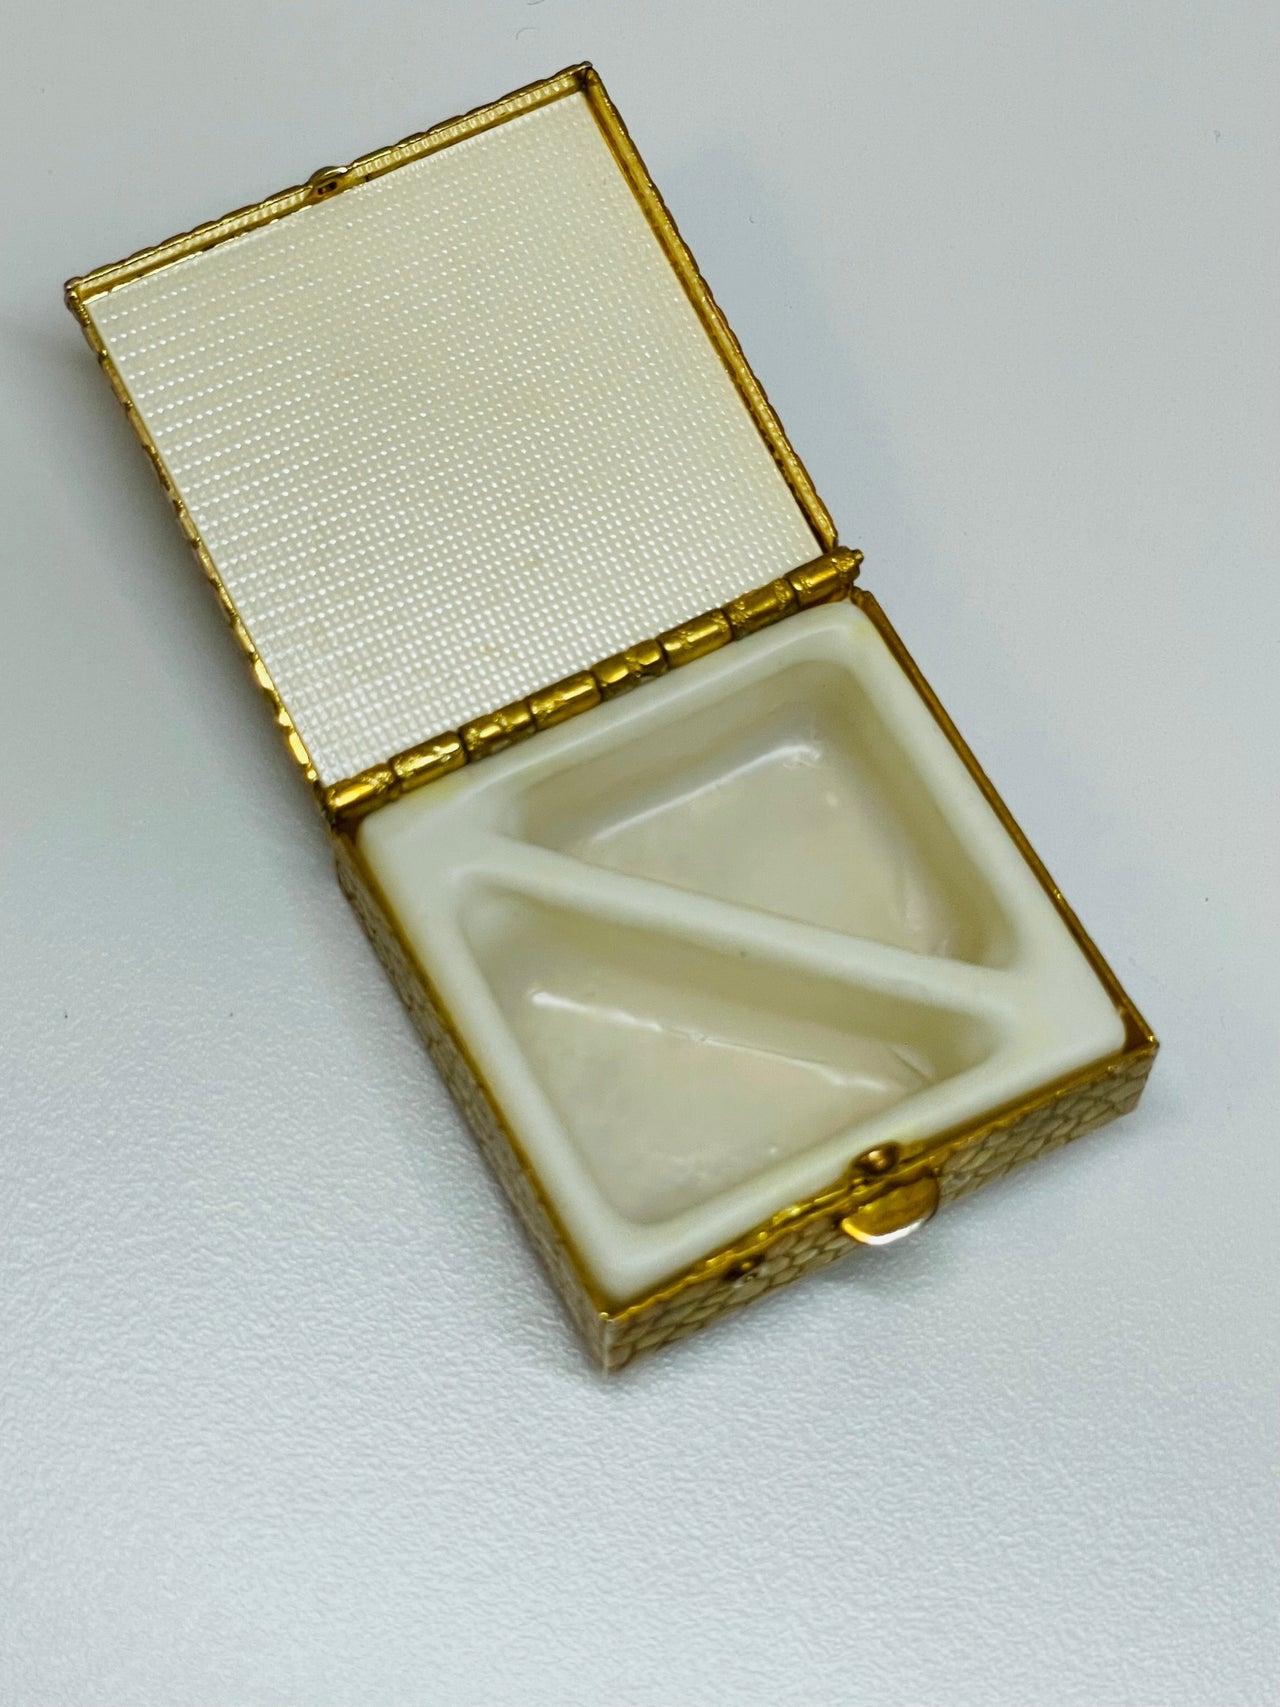 Gold Square Pill Box with Green Cabochon Devil's Details 